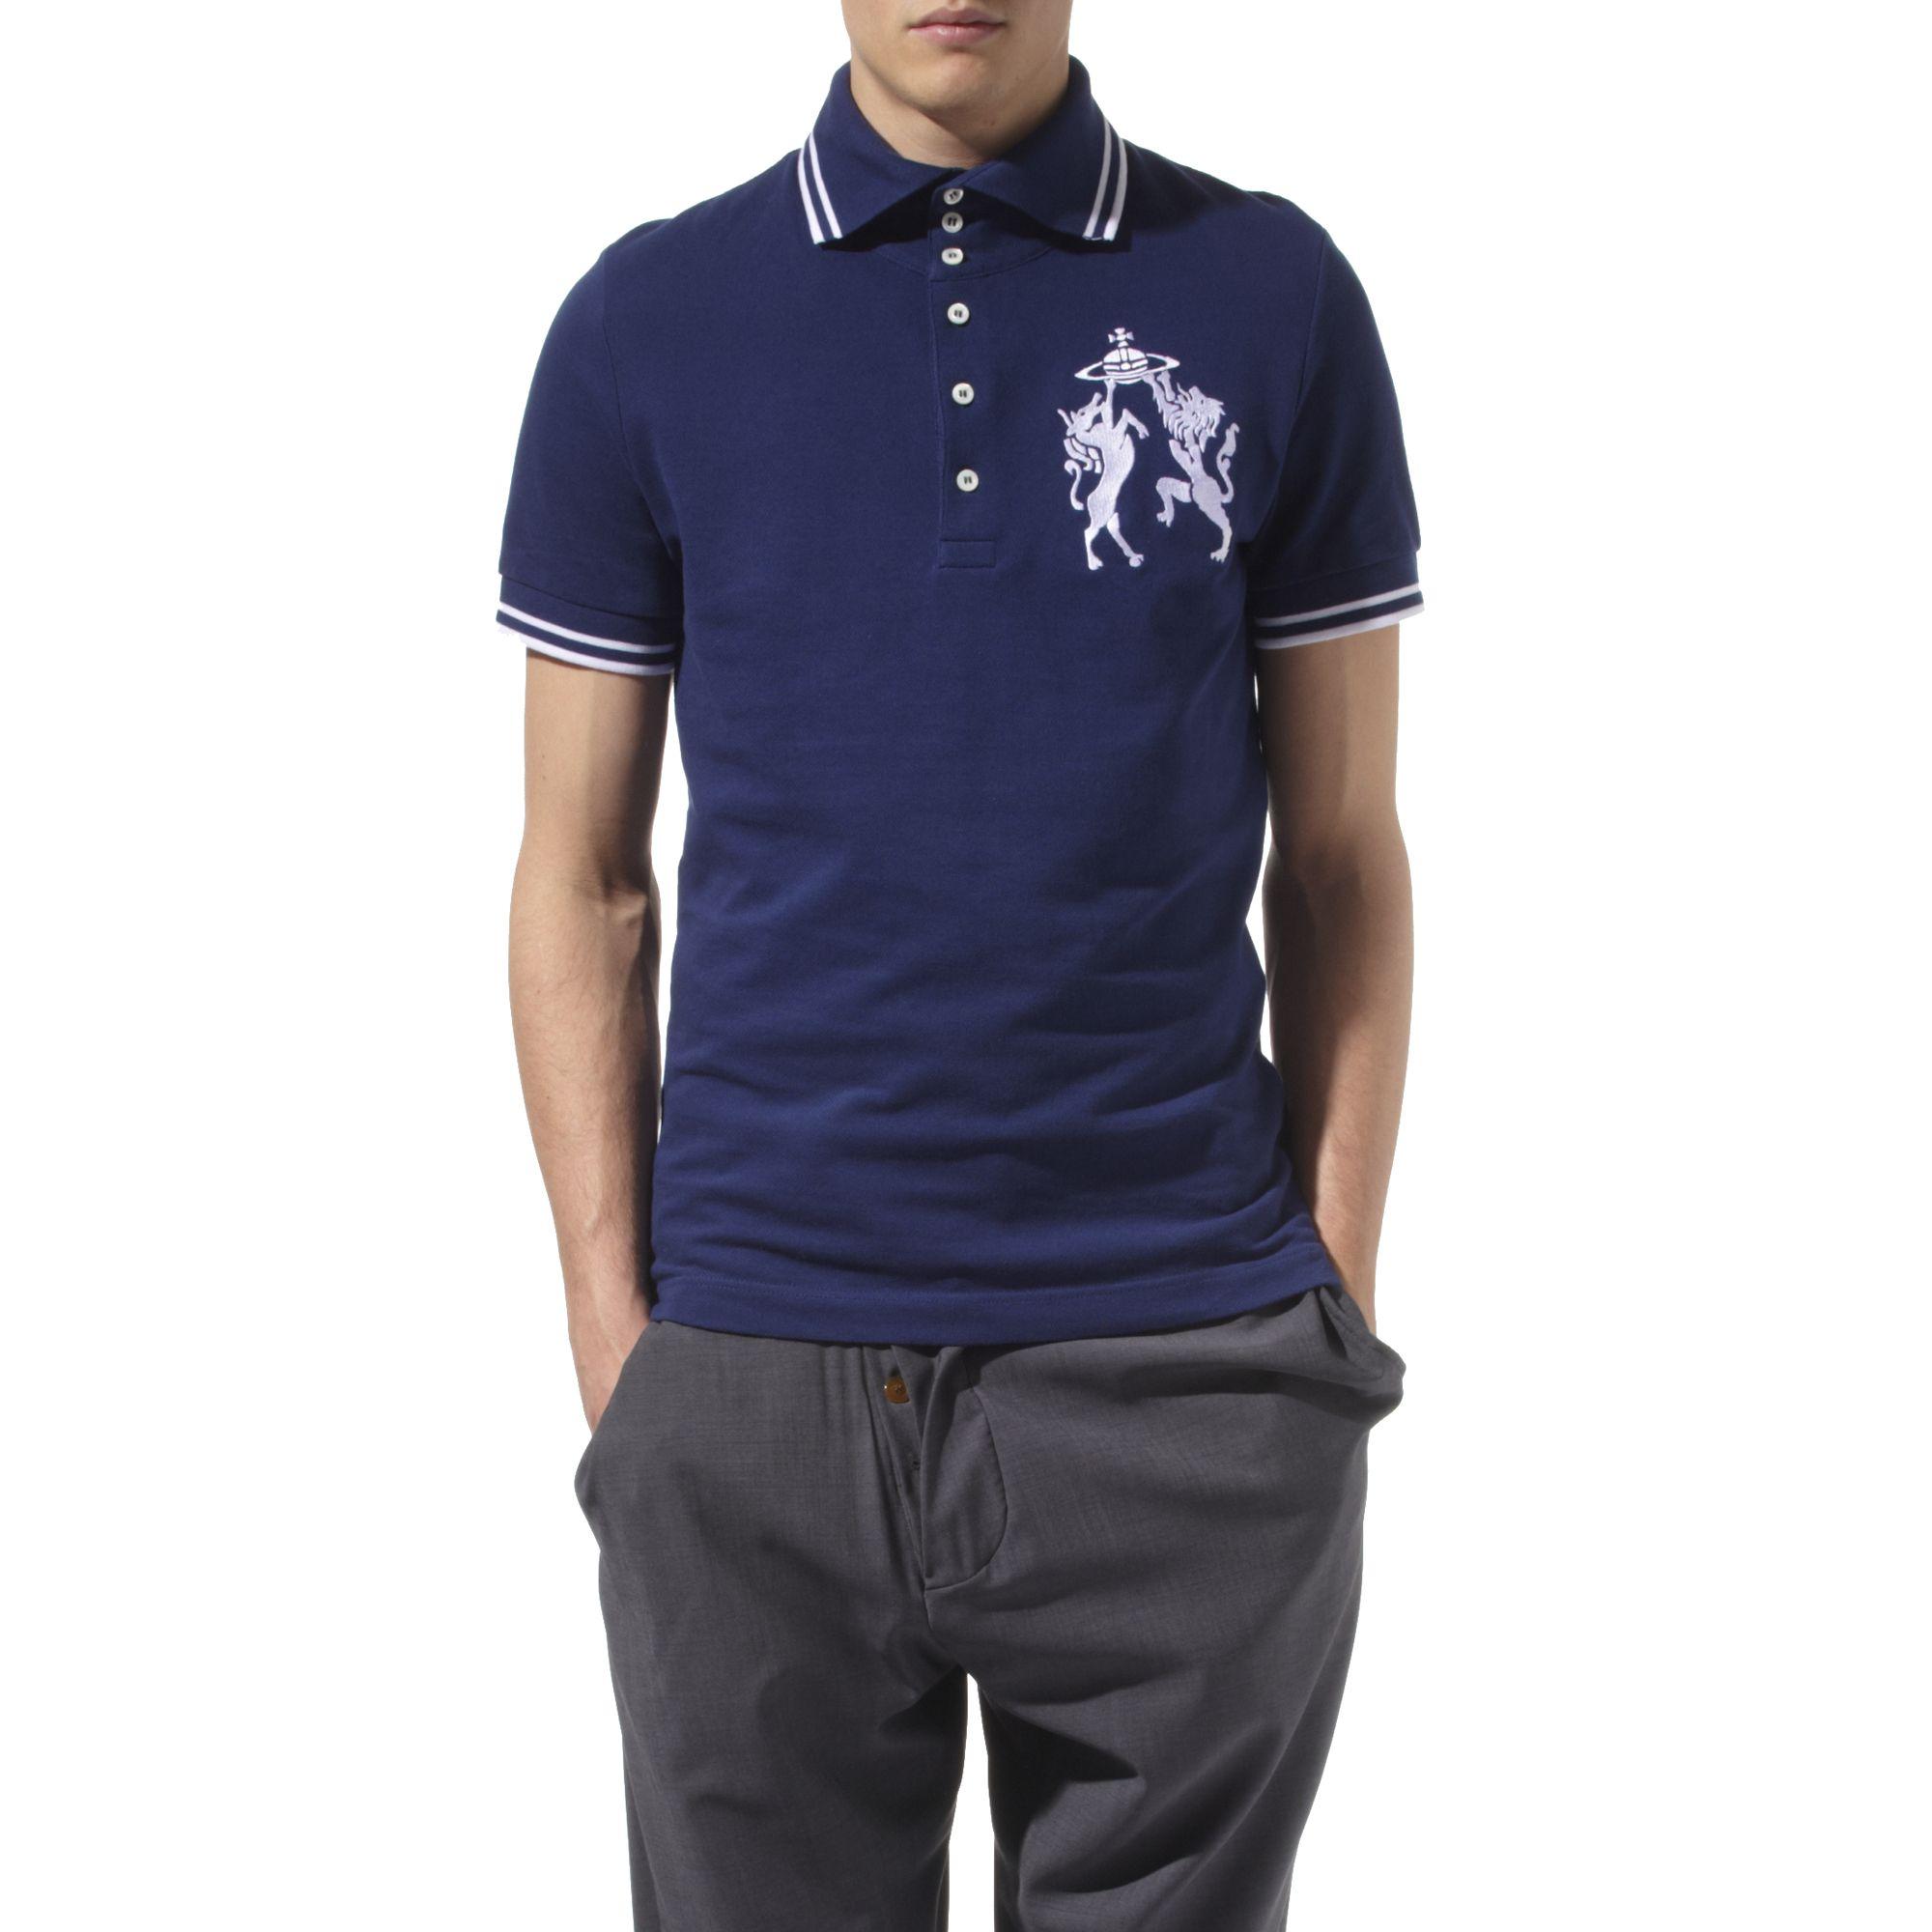 Large Polo Logo - Vivienne Westwood Large Logo Polo Shirt in Blue for Men - Lyst